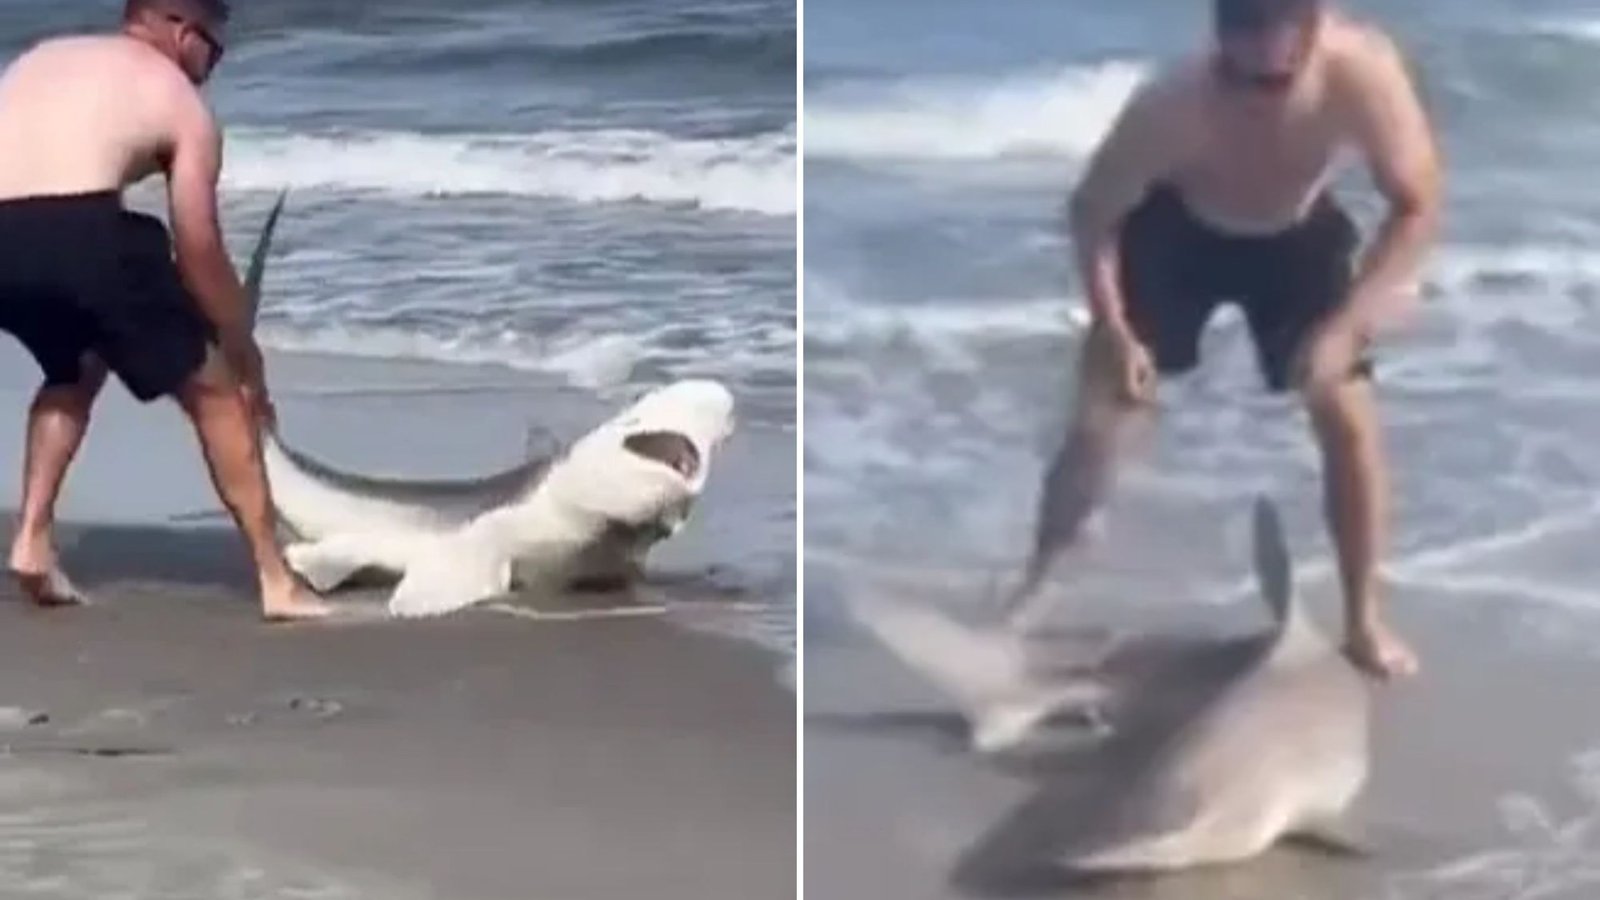 Watch moment beachgoer wrestles with shark before grabbing it by TAIL hurling it back into sea